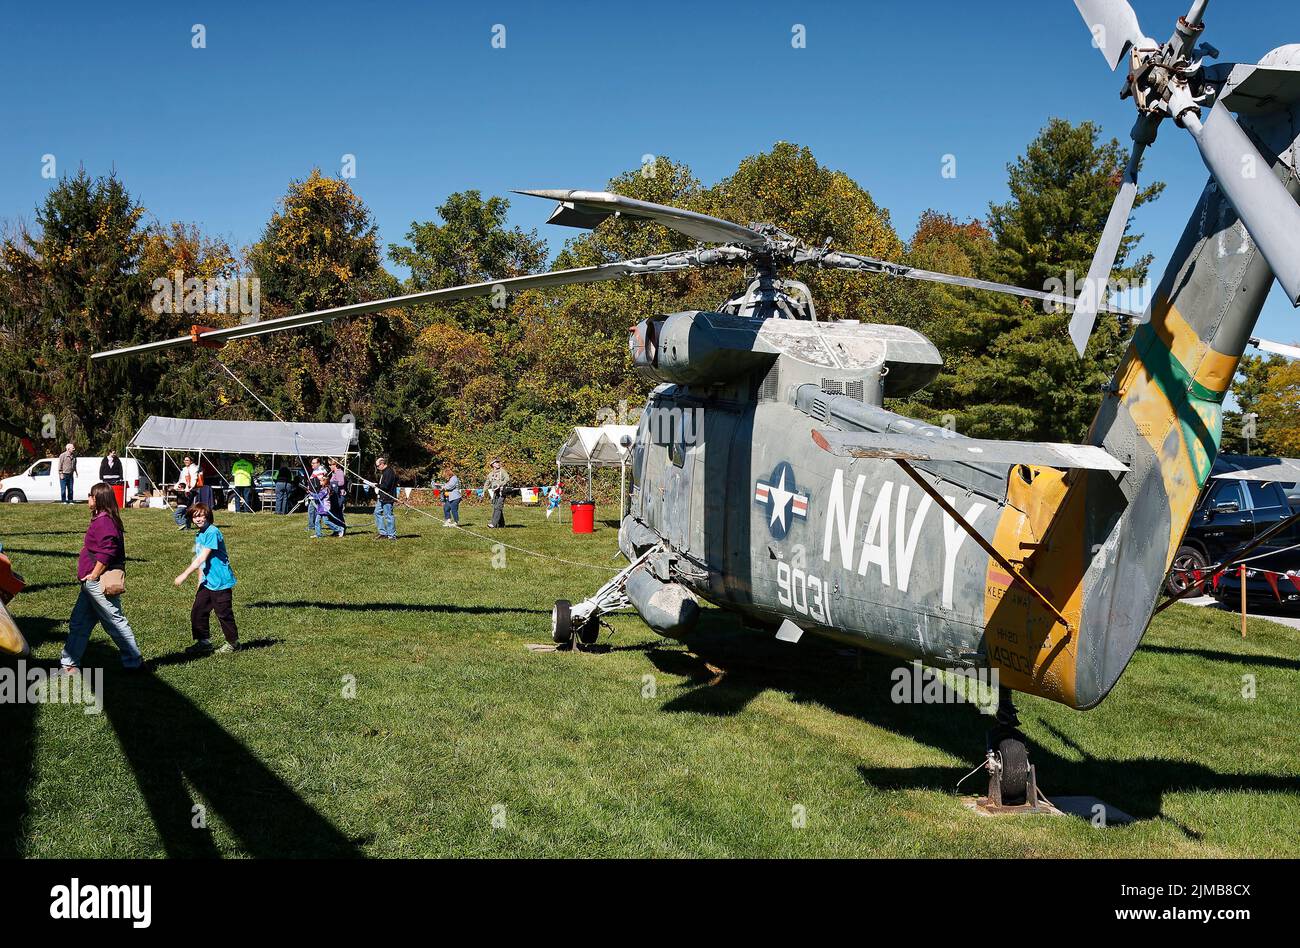 Navy helicopter, vintage, grey color, outdoors, aircraft, military, transportation, visitors, Helicopter Museum; Pennsylvania; West Chester, PA Stock Photo